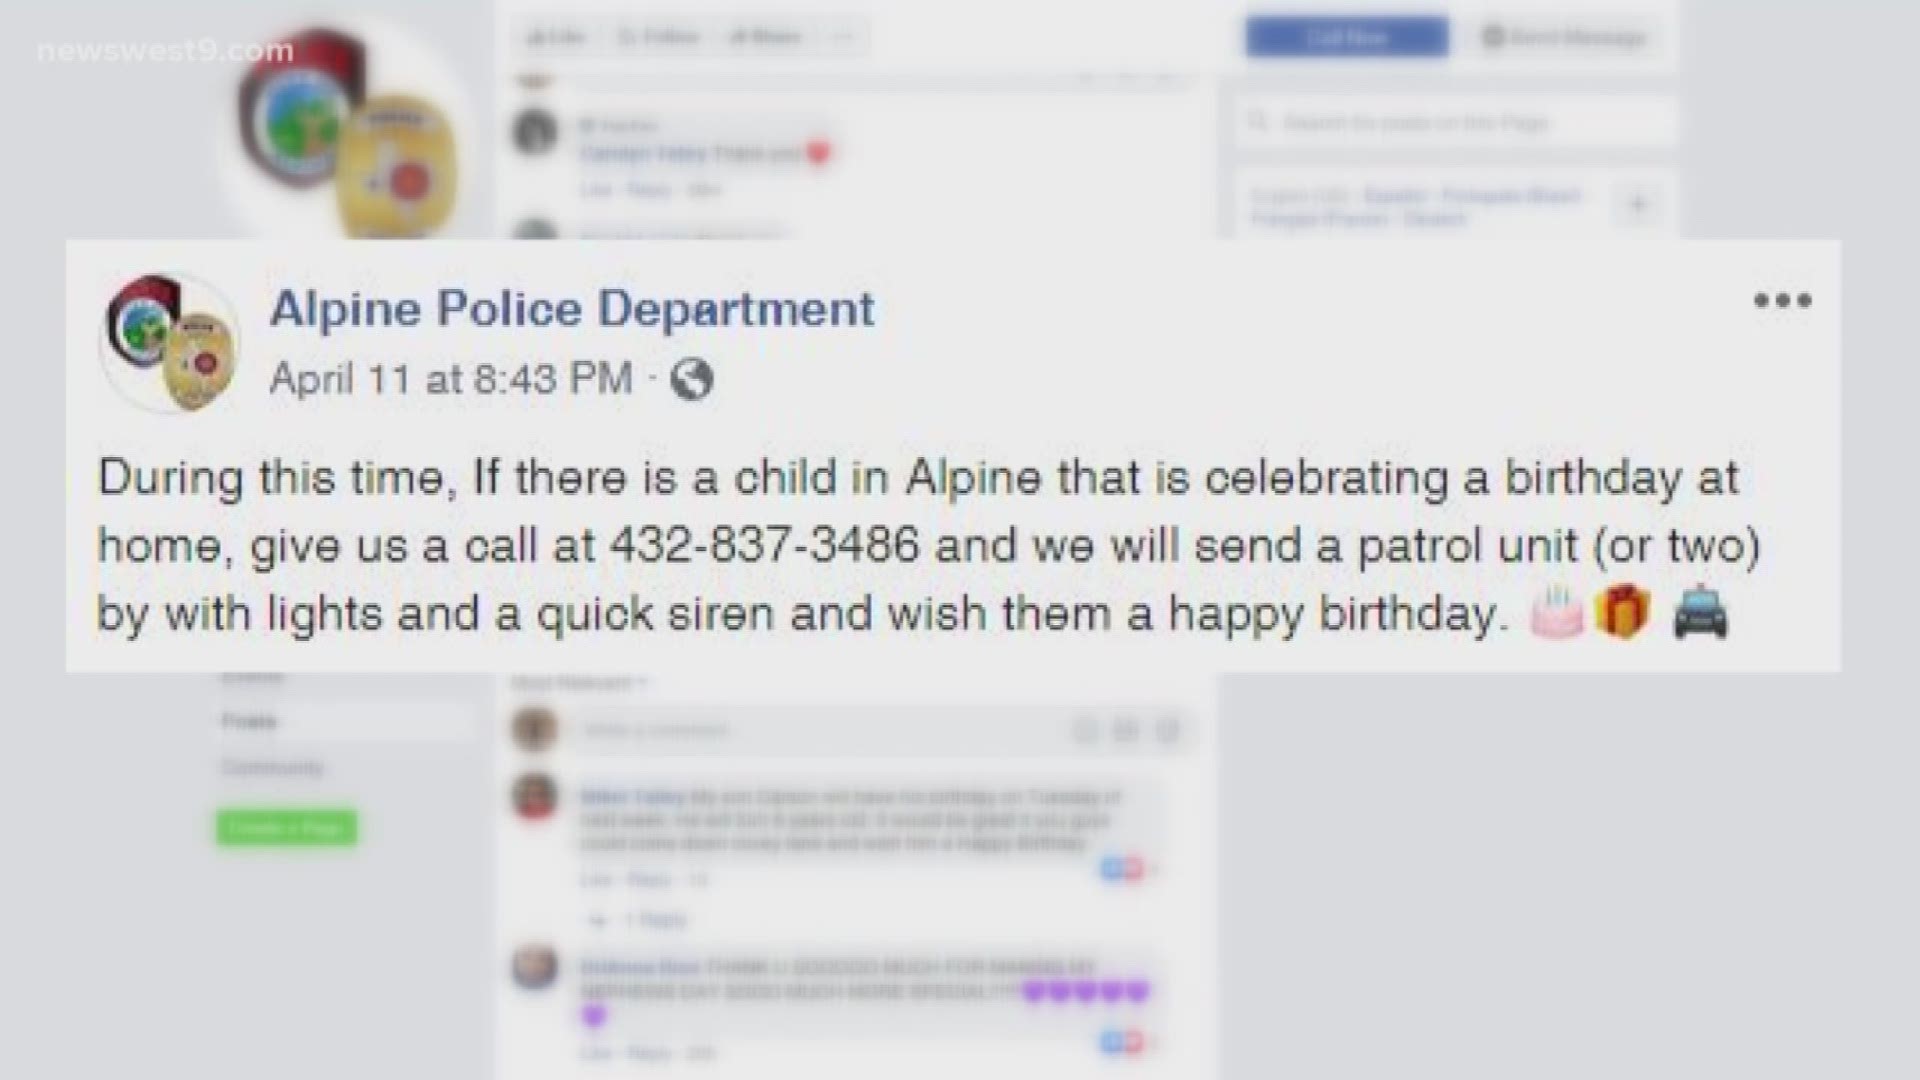 Police have offered to drop by the houses of children celebrating their birthday to say hello with lights and sirens.